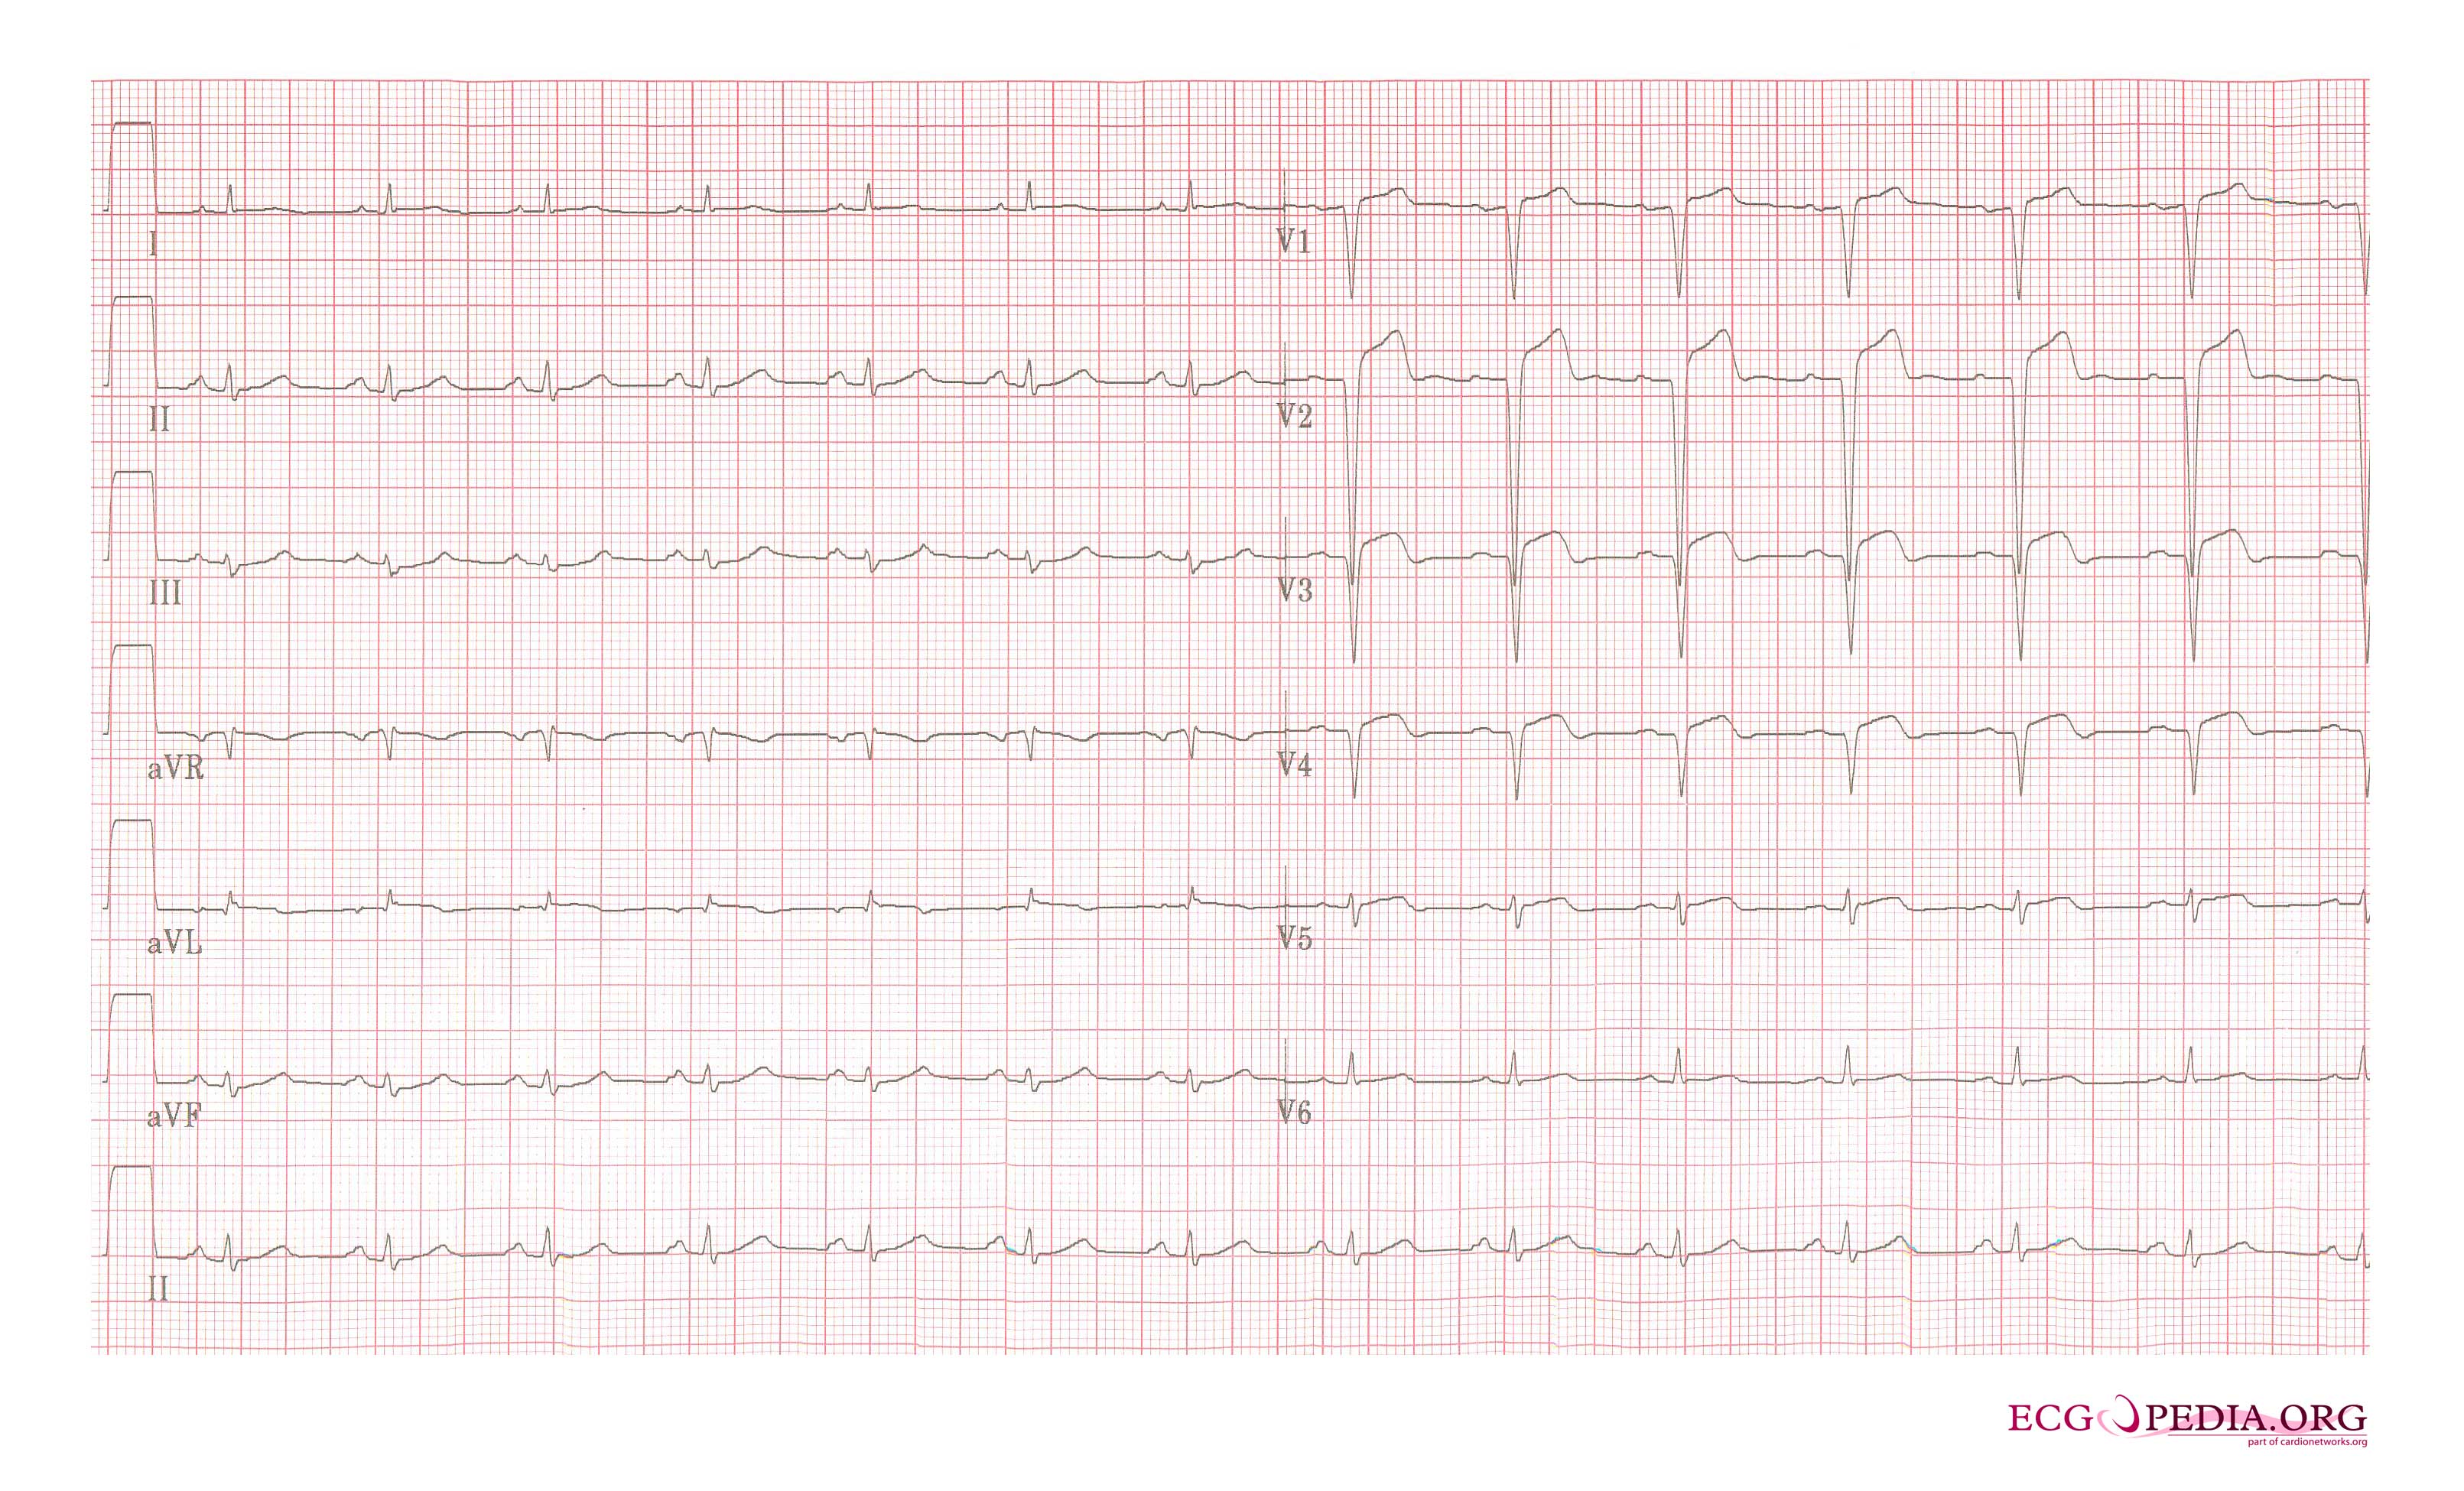 A 2 days old anterior infarction with Q waves in V1-V4 with persisting ST elevation, a sign of left ventricular aneurysm formation.